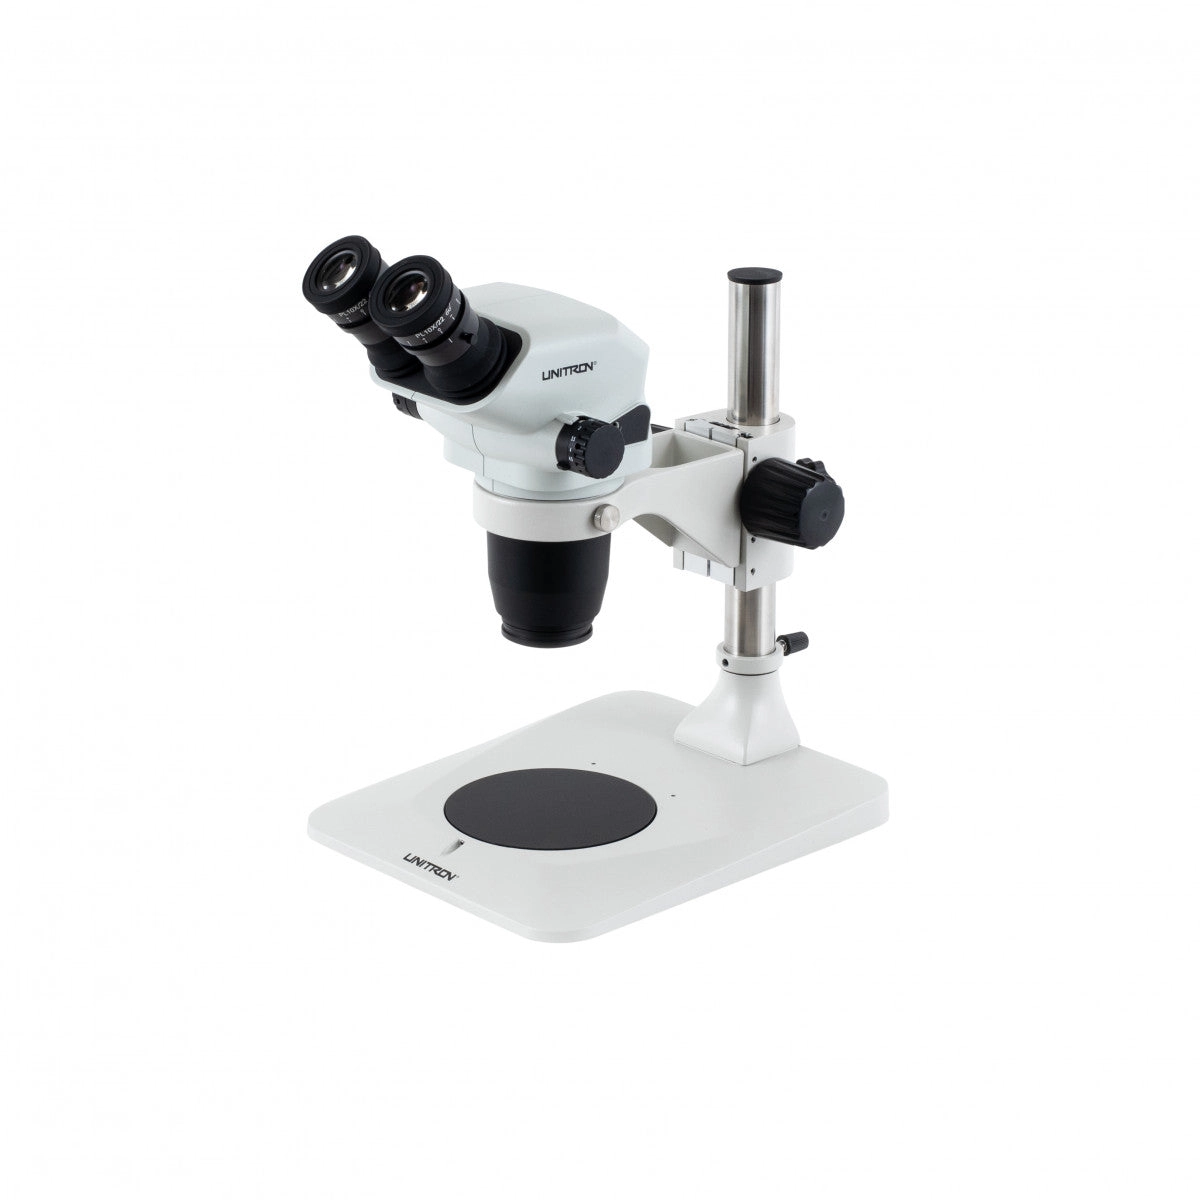 Unitron Z645 Zoom Stereo Microscope on Pole Stand | Inspection Microscope